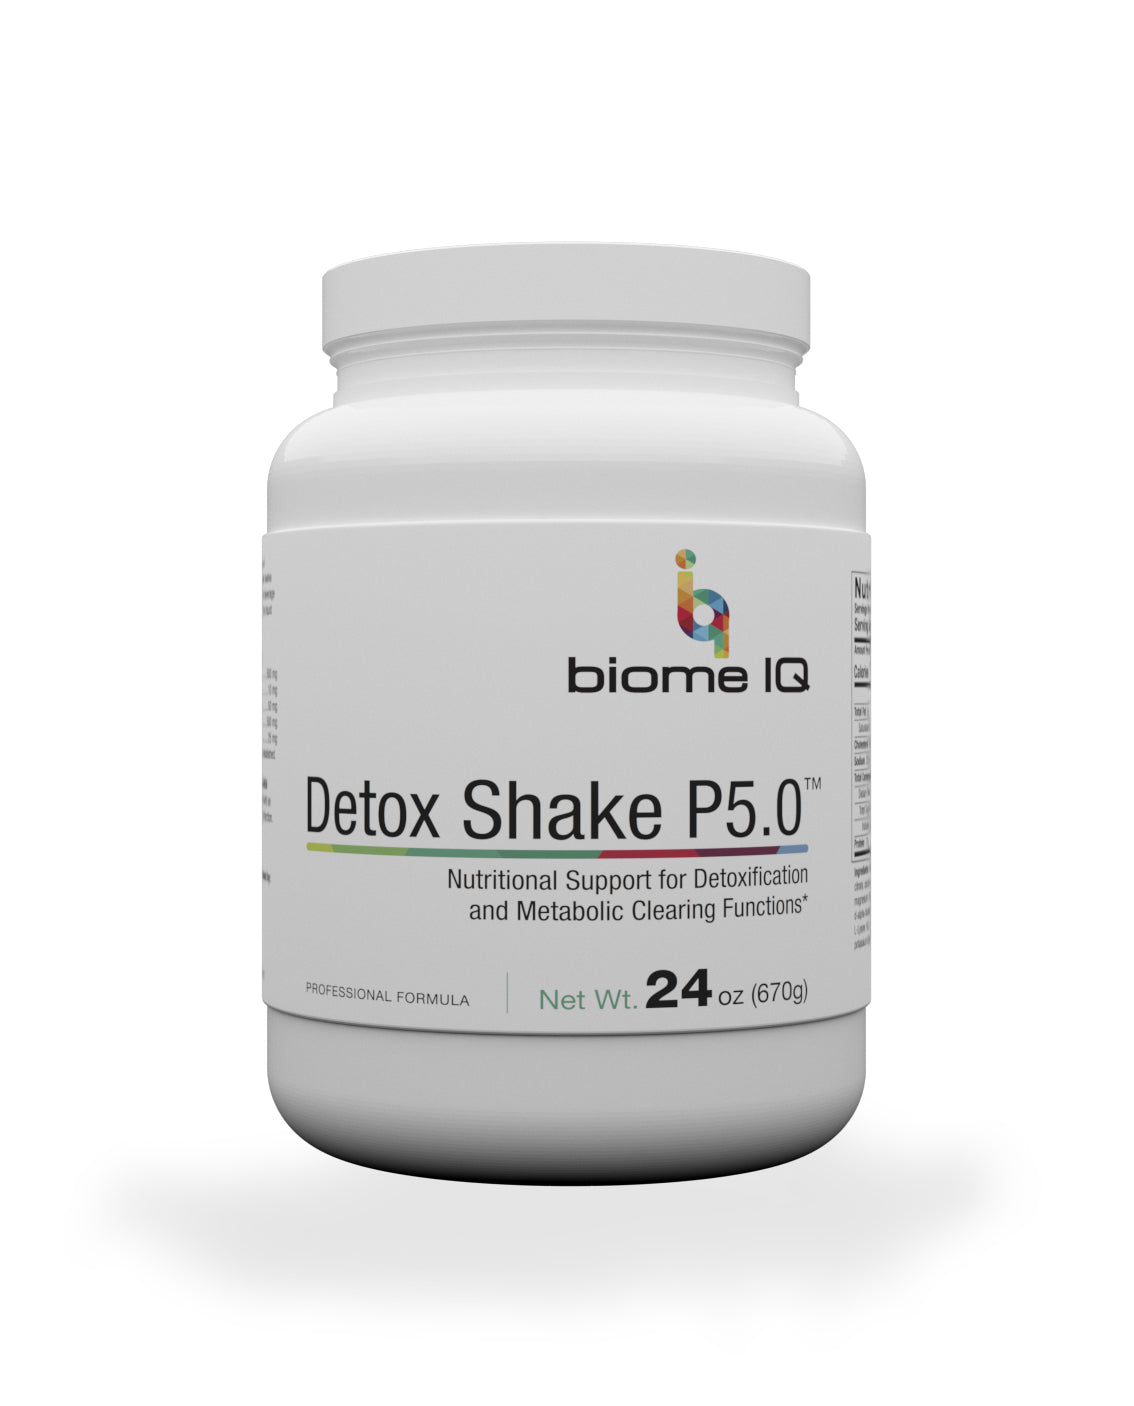 Nutritional Support for Detoxification and Metabolic Clearing Functions.  This shake can be used by itself for on-going daily detoxification support or in combination with P5.0 30-Pack.  Designed for the rigorous demands of MTHFR enzyme reduction.